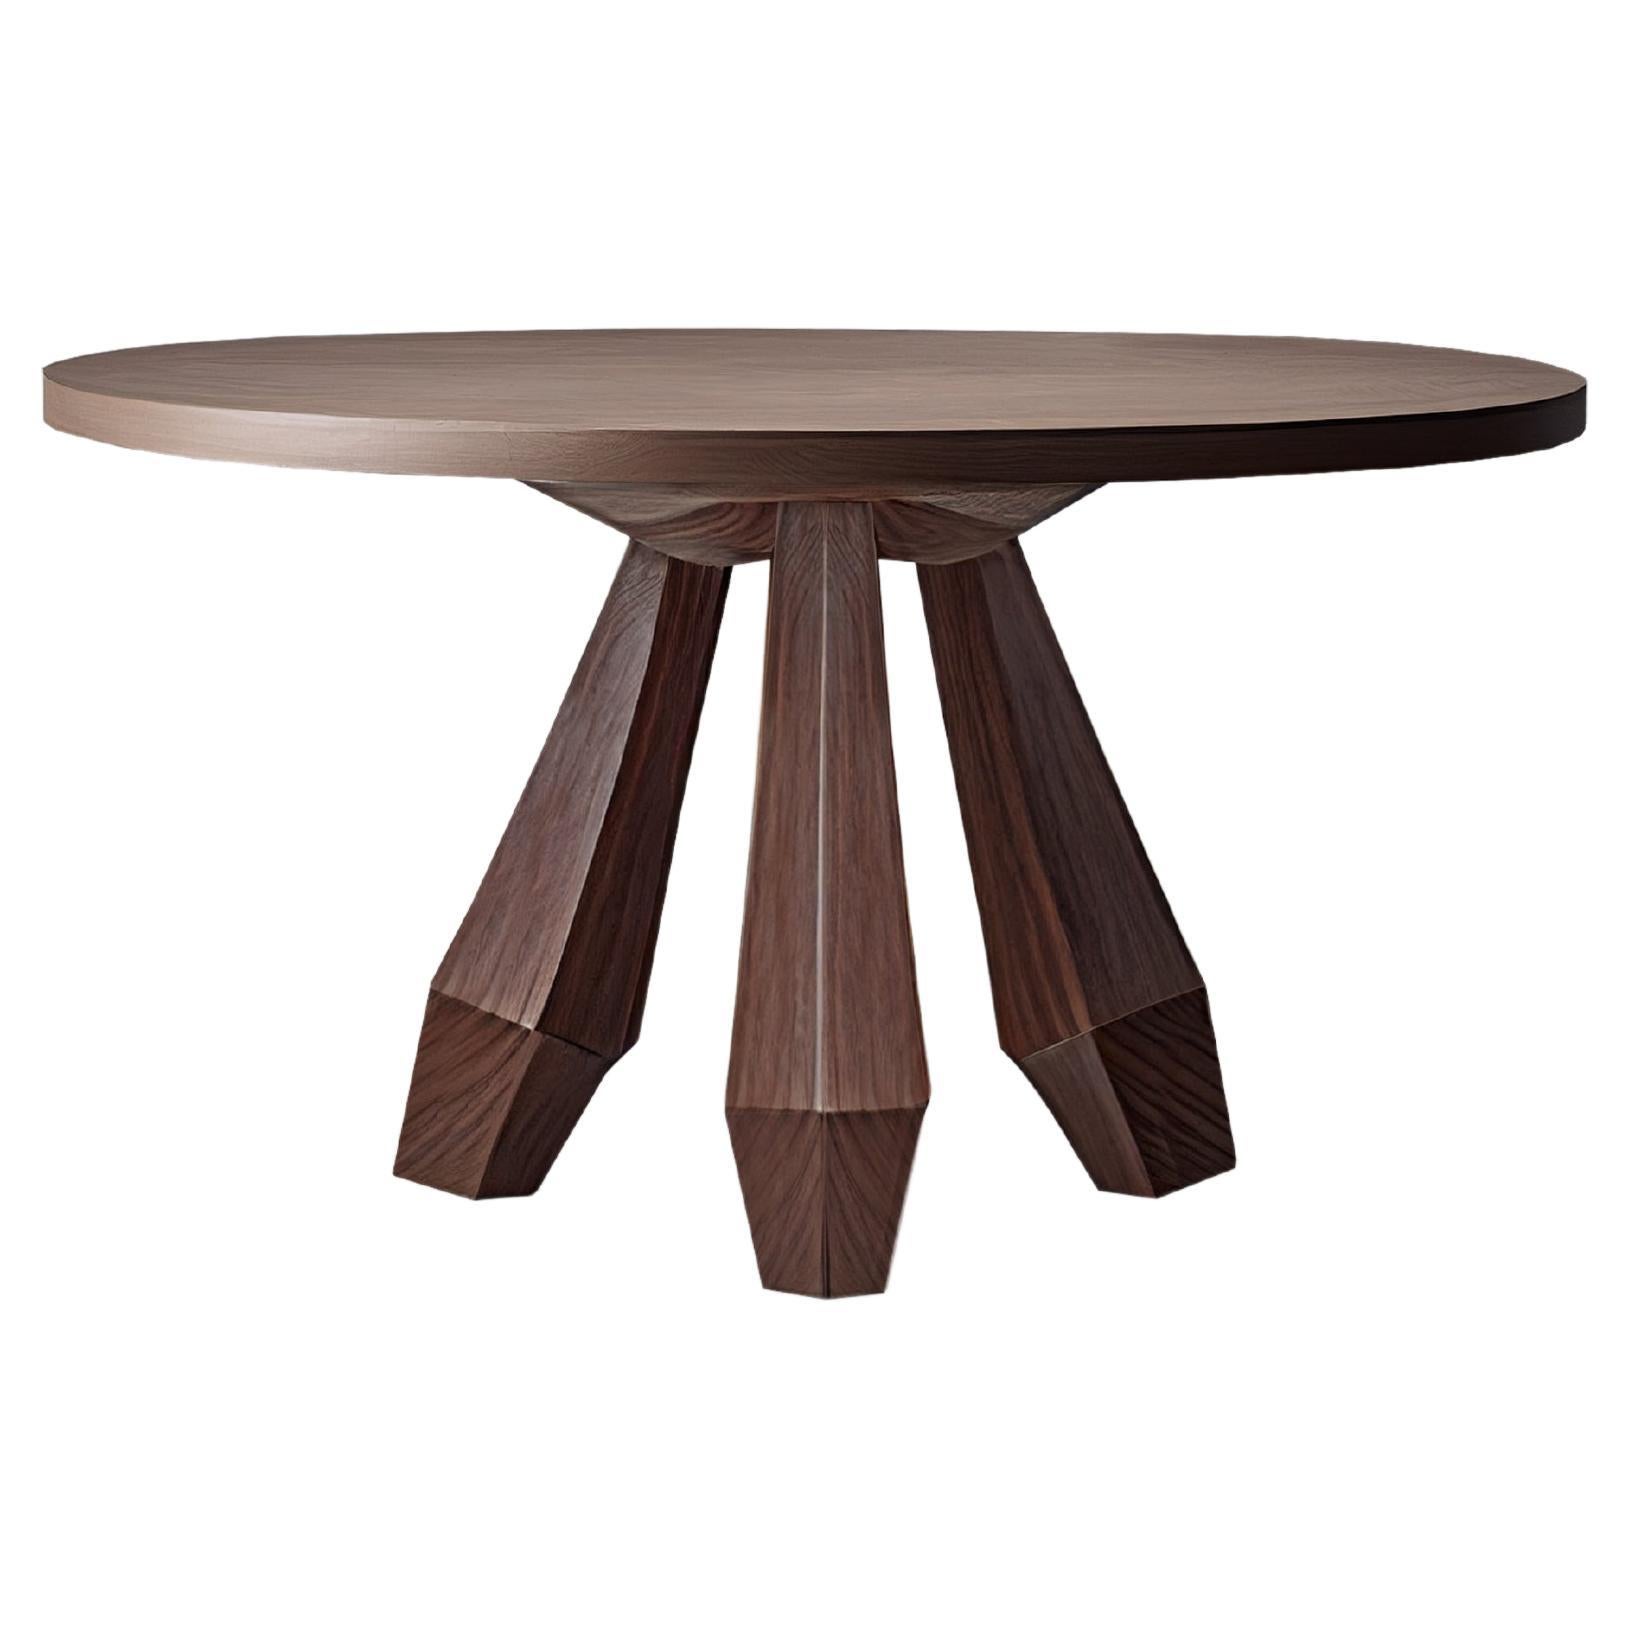 Dining Table Inspired by Charlotte Perriand's Sandoz Stool Design